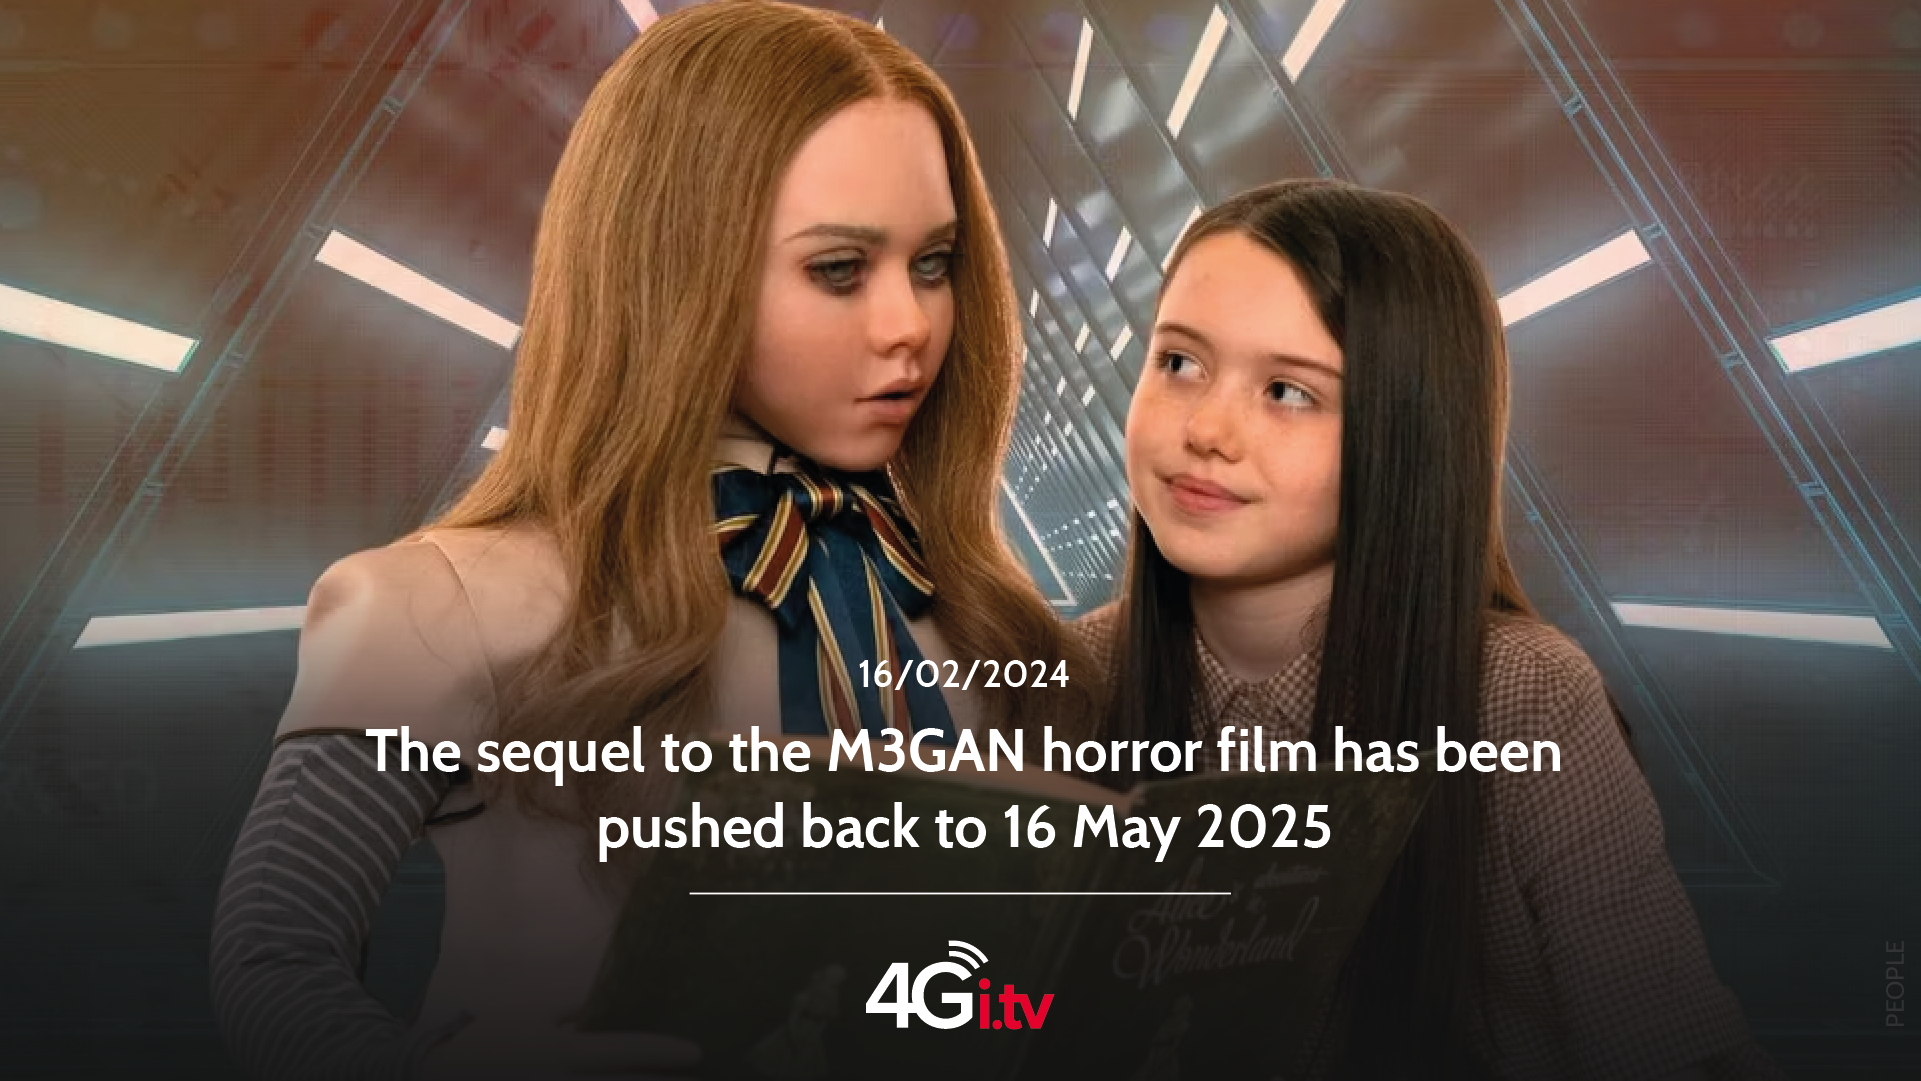 Read more about the article The sequel to the M3GAN horror film has been pushed back to 16 May 2025 